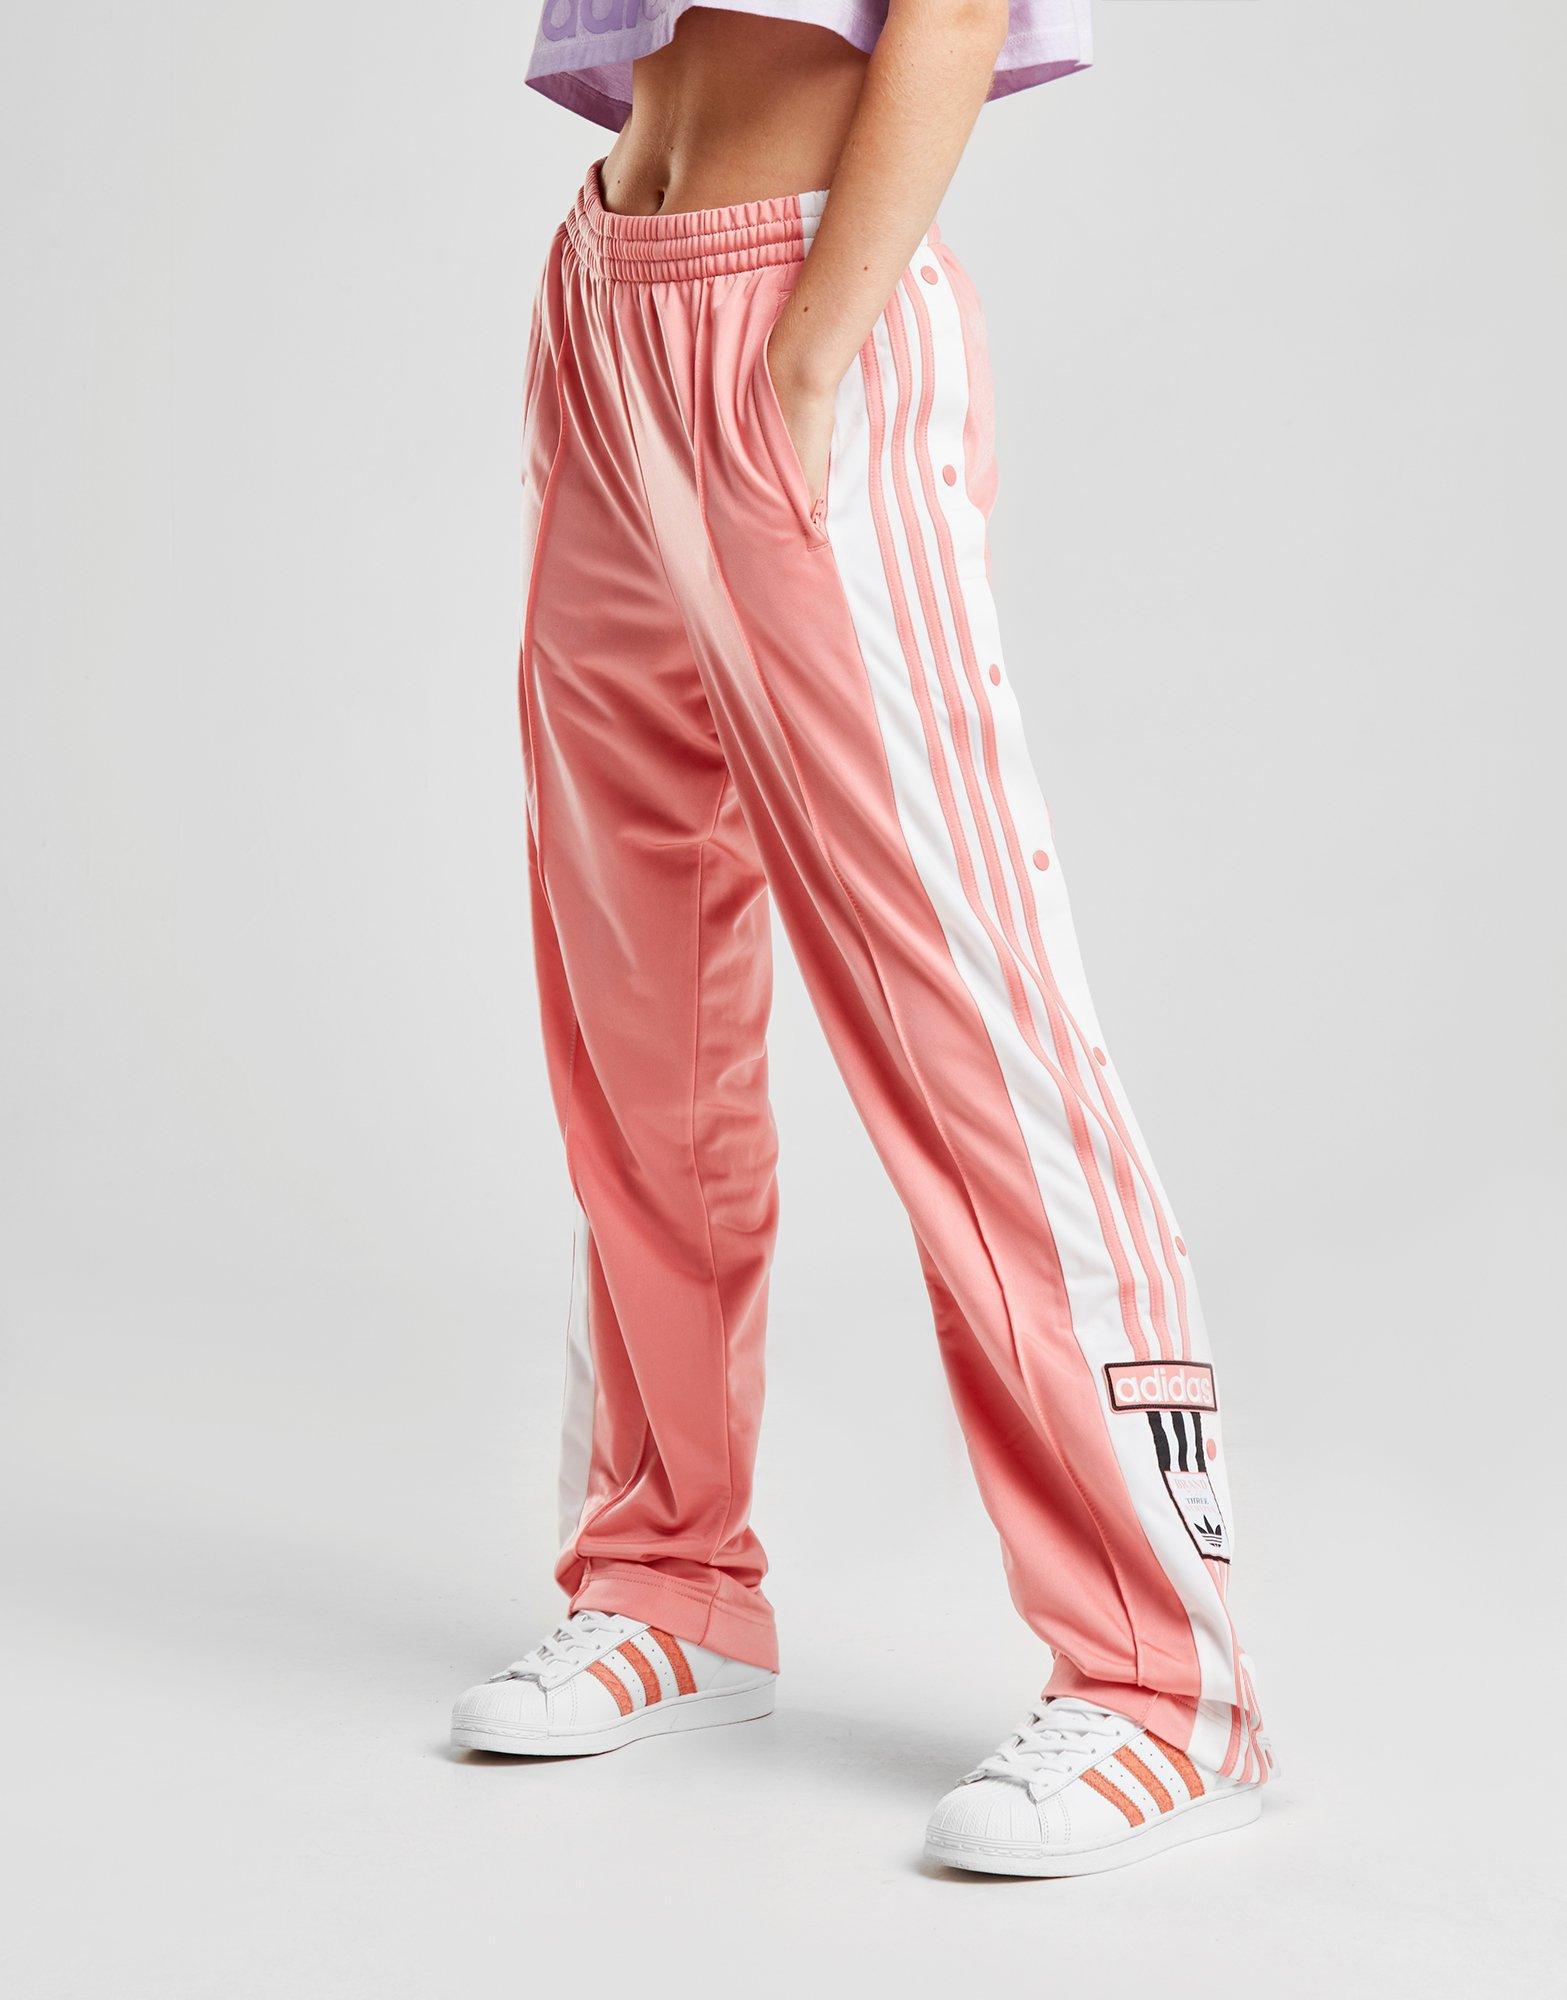 Adidas Popper Pants Purple Hotsell, SAVE 33% - aveclumiere.com